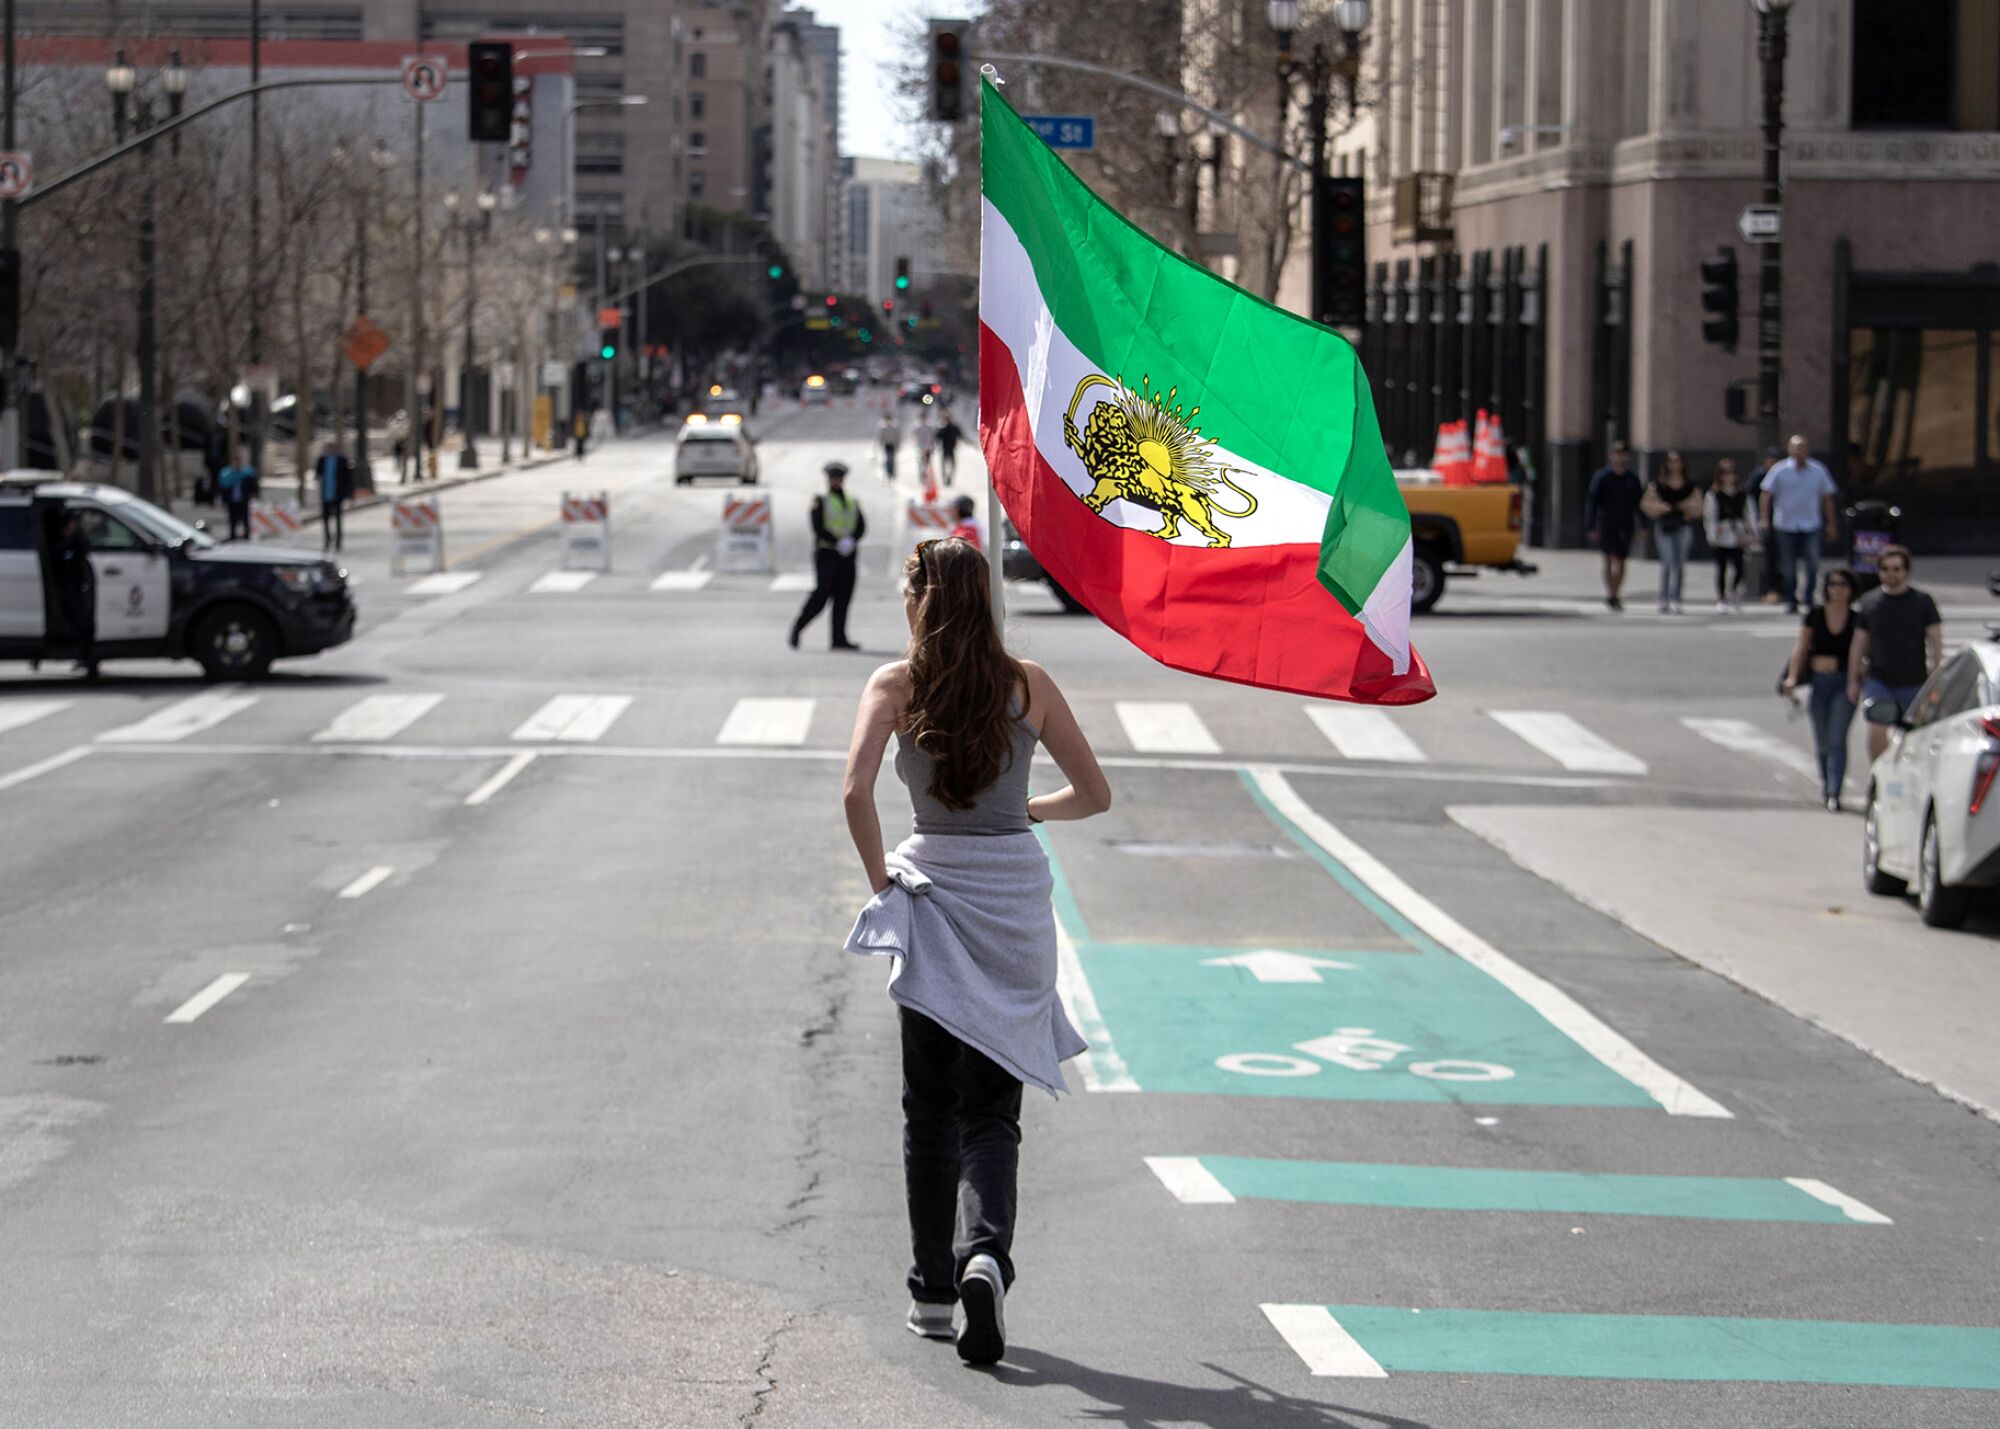 A woman carrying a large Iranian flag walks down the middle of a street.